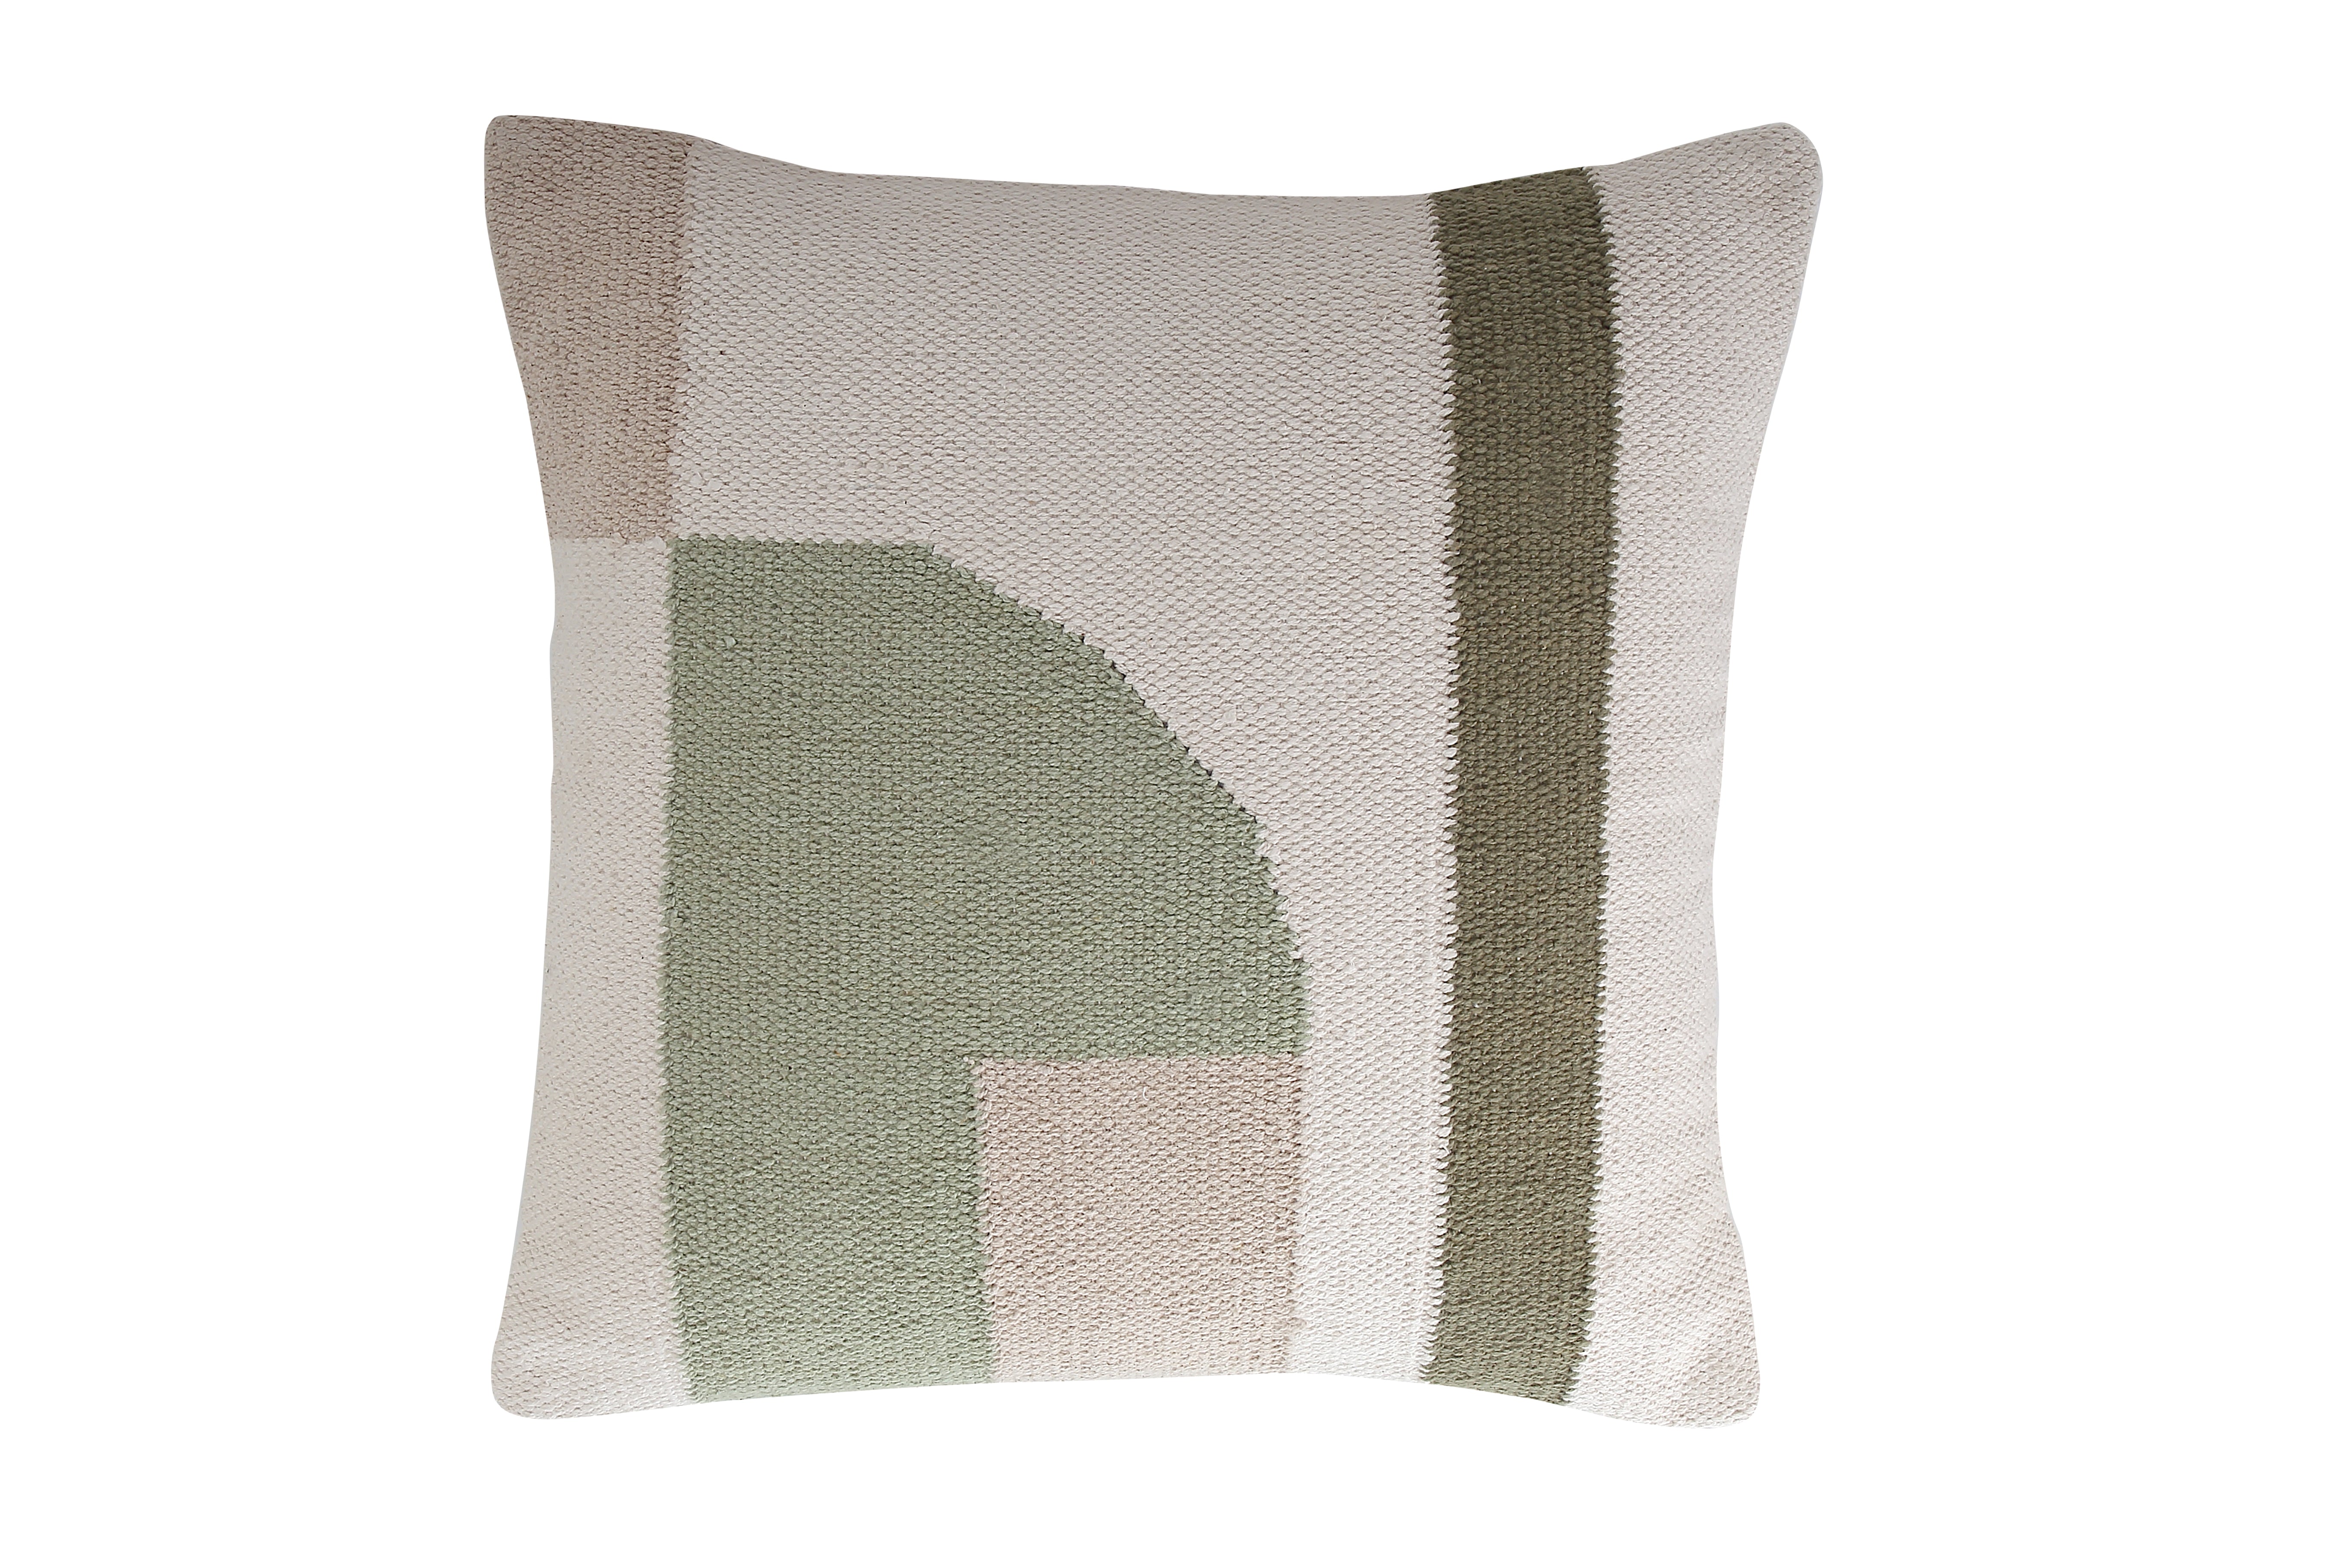  CC Themed Throw Pillow Cover : Handmade Products